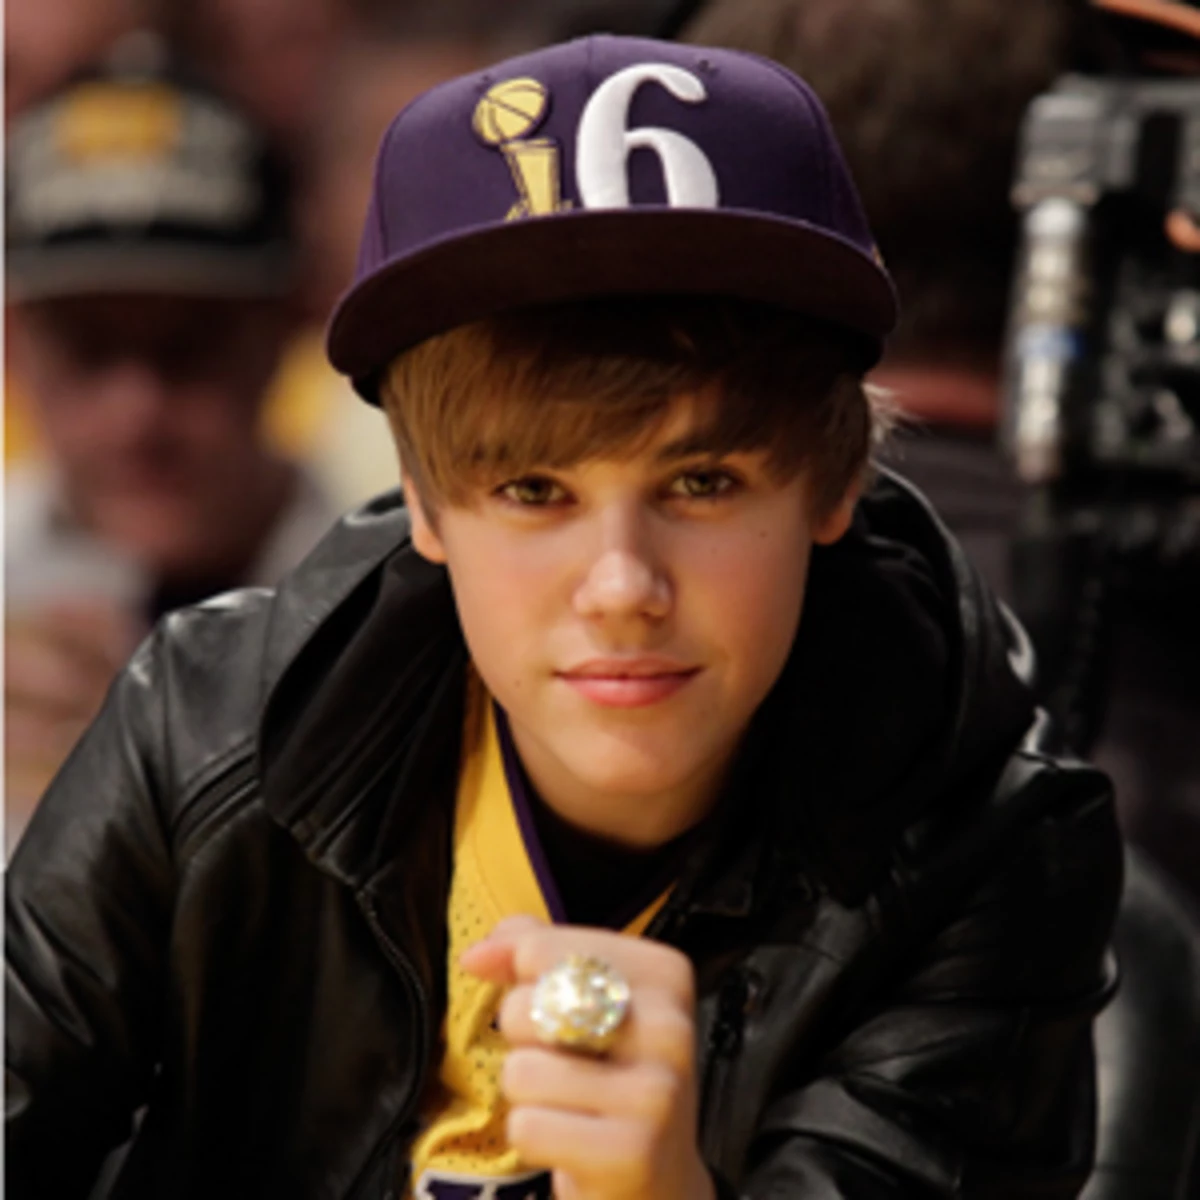 Justin Bieber's Spiked Hat Sparks Criticism Is It Really His Worst Look Ever? (PHOTOS)